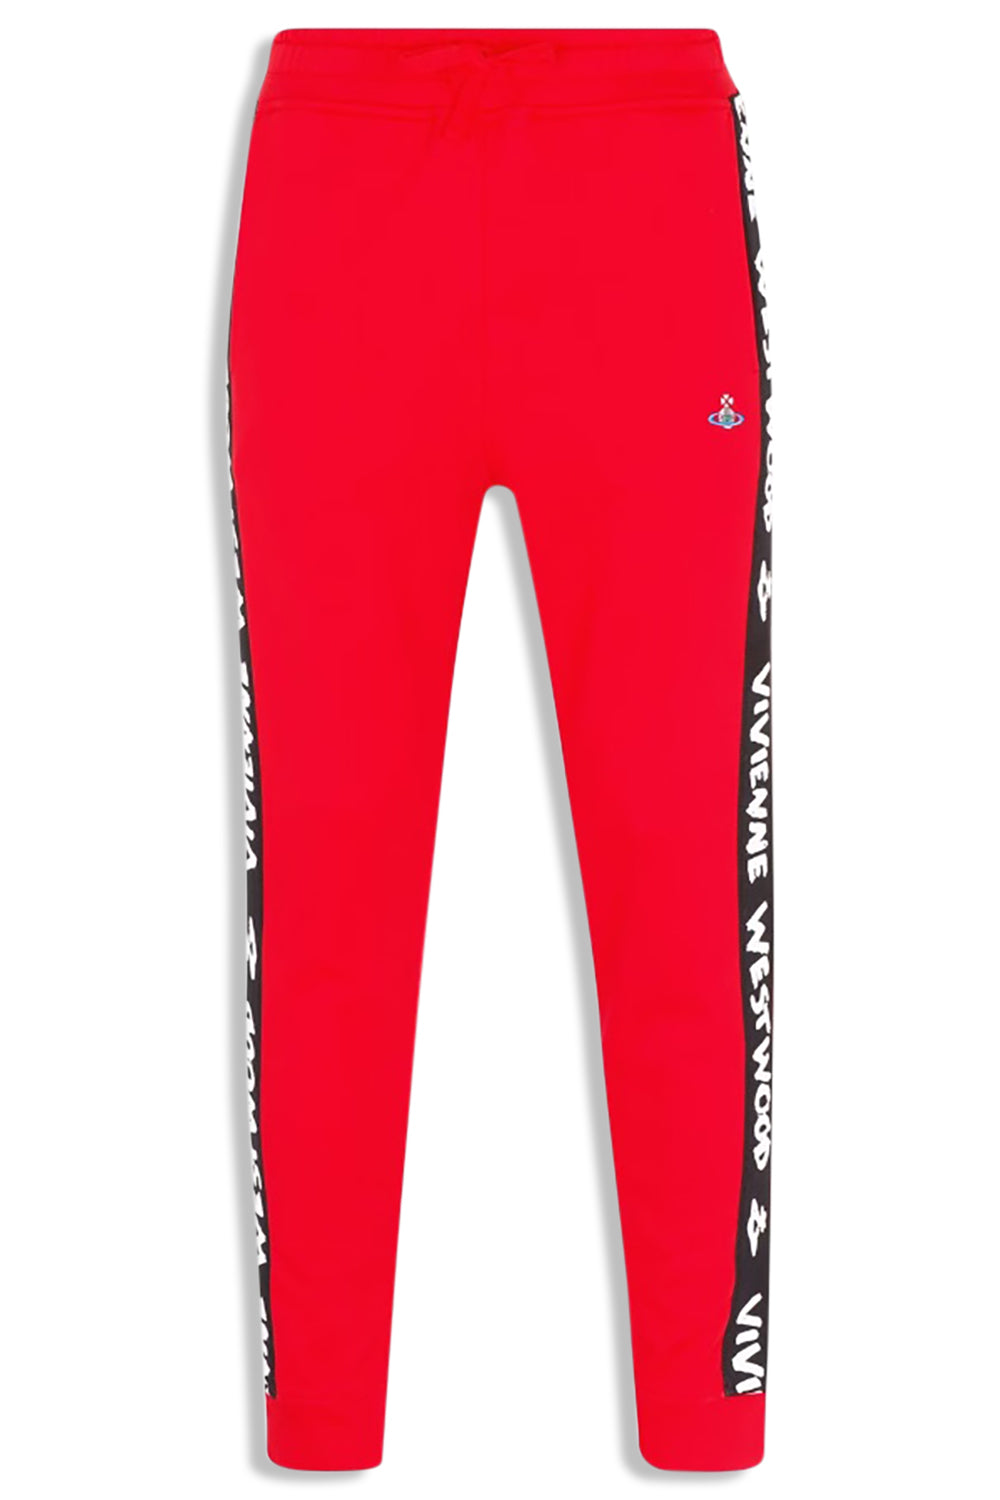 Men's Red Vivienne Westwood Taped Jogger